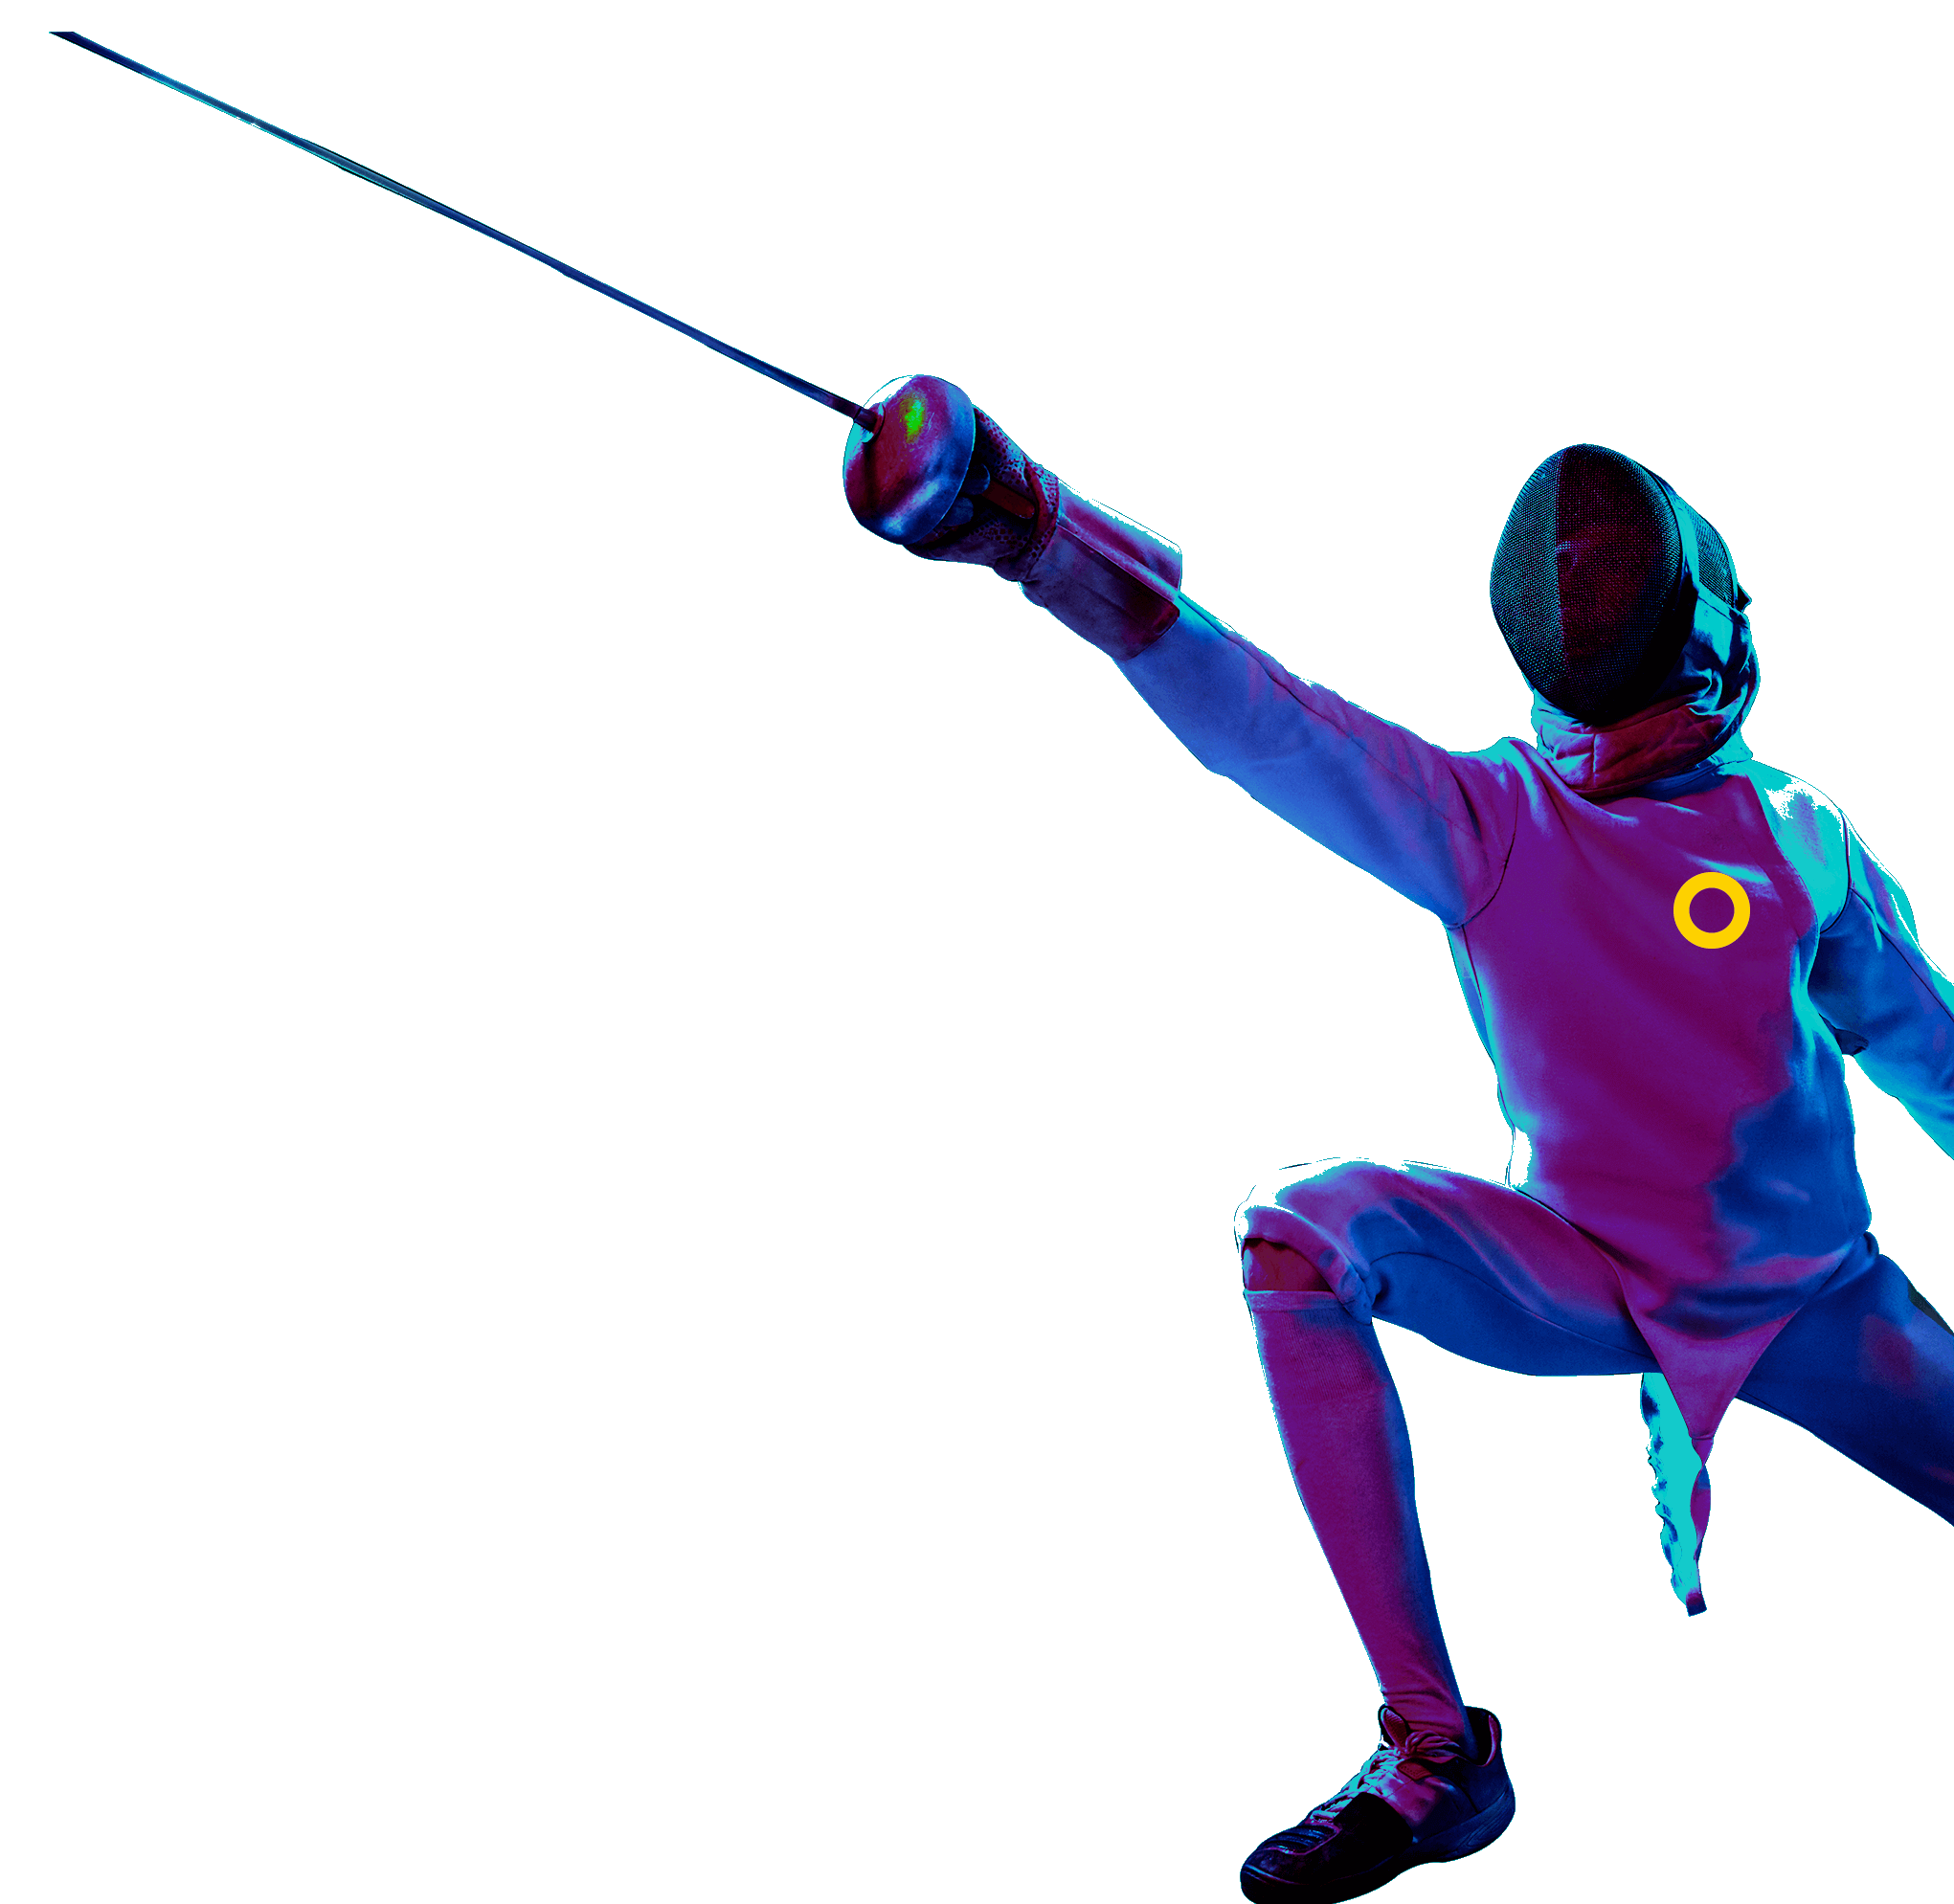 In the picture, a fencer is tilting and extending one of her arms and his weapon. He is wearing a mask, a jacket and white pants, apart from gloves.